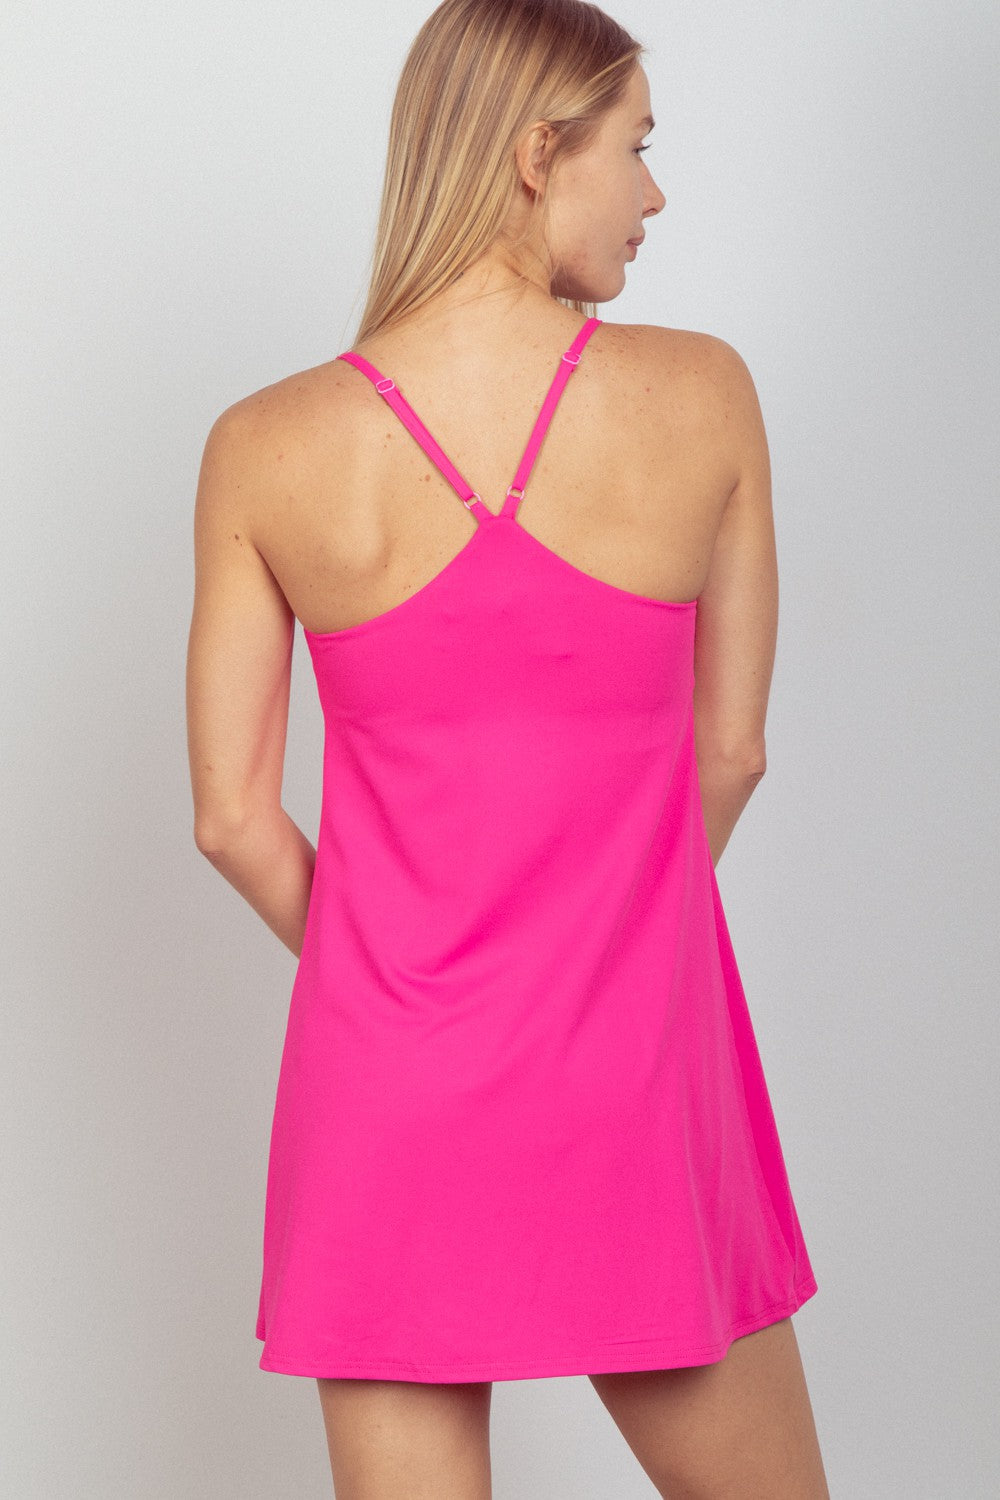 VERY J Sleeveless Active Tennis Dress with Unitard Liner - Cheeky Chic Boutique